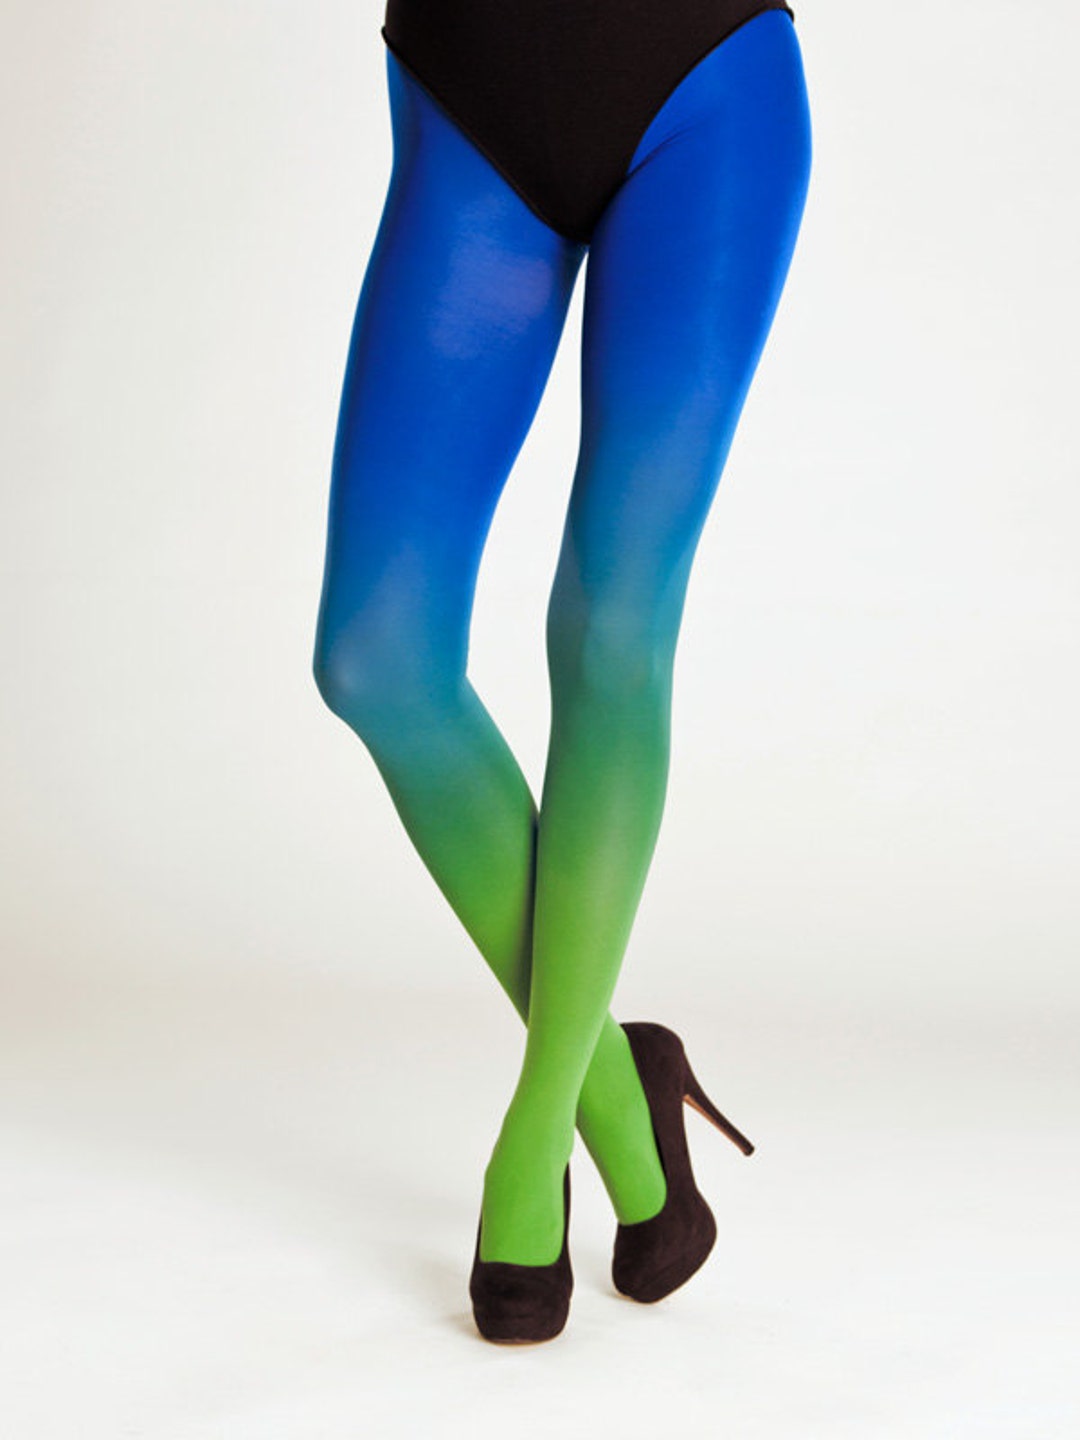 Tights for Women, Ombre Tights Green-blue Opaque Tights, Gift for